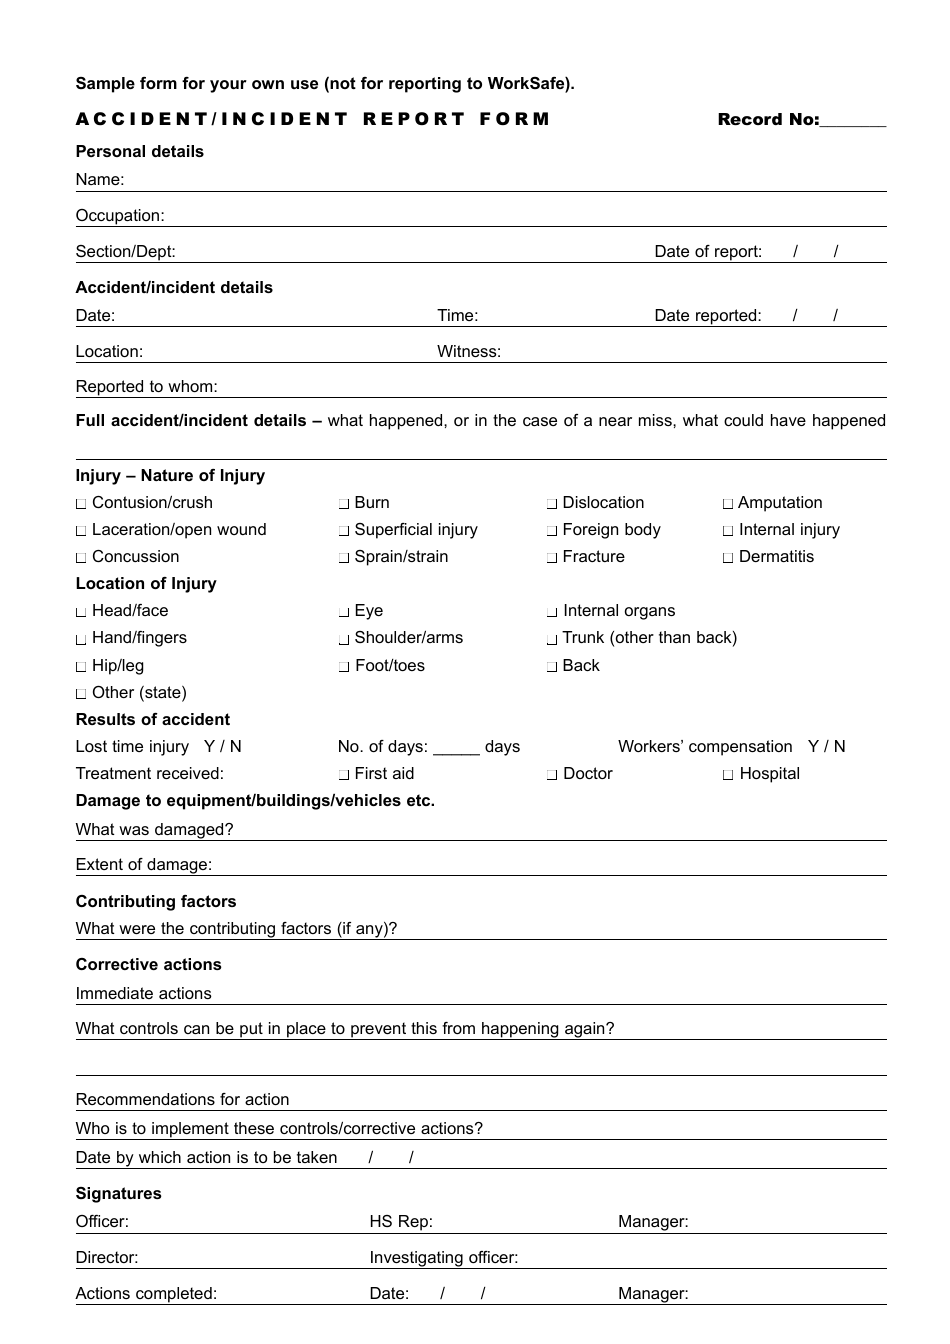 Sample Accident / Incident Report Form, Page 1